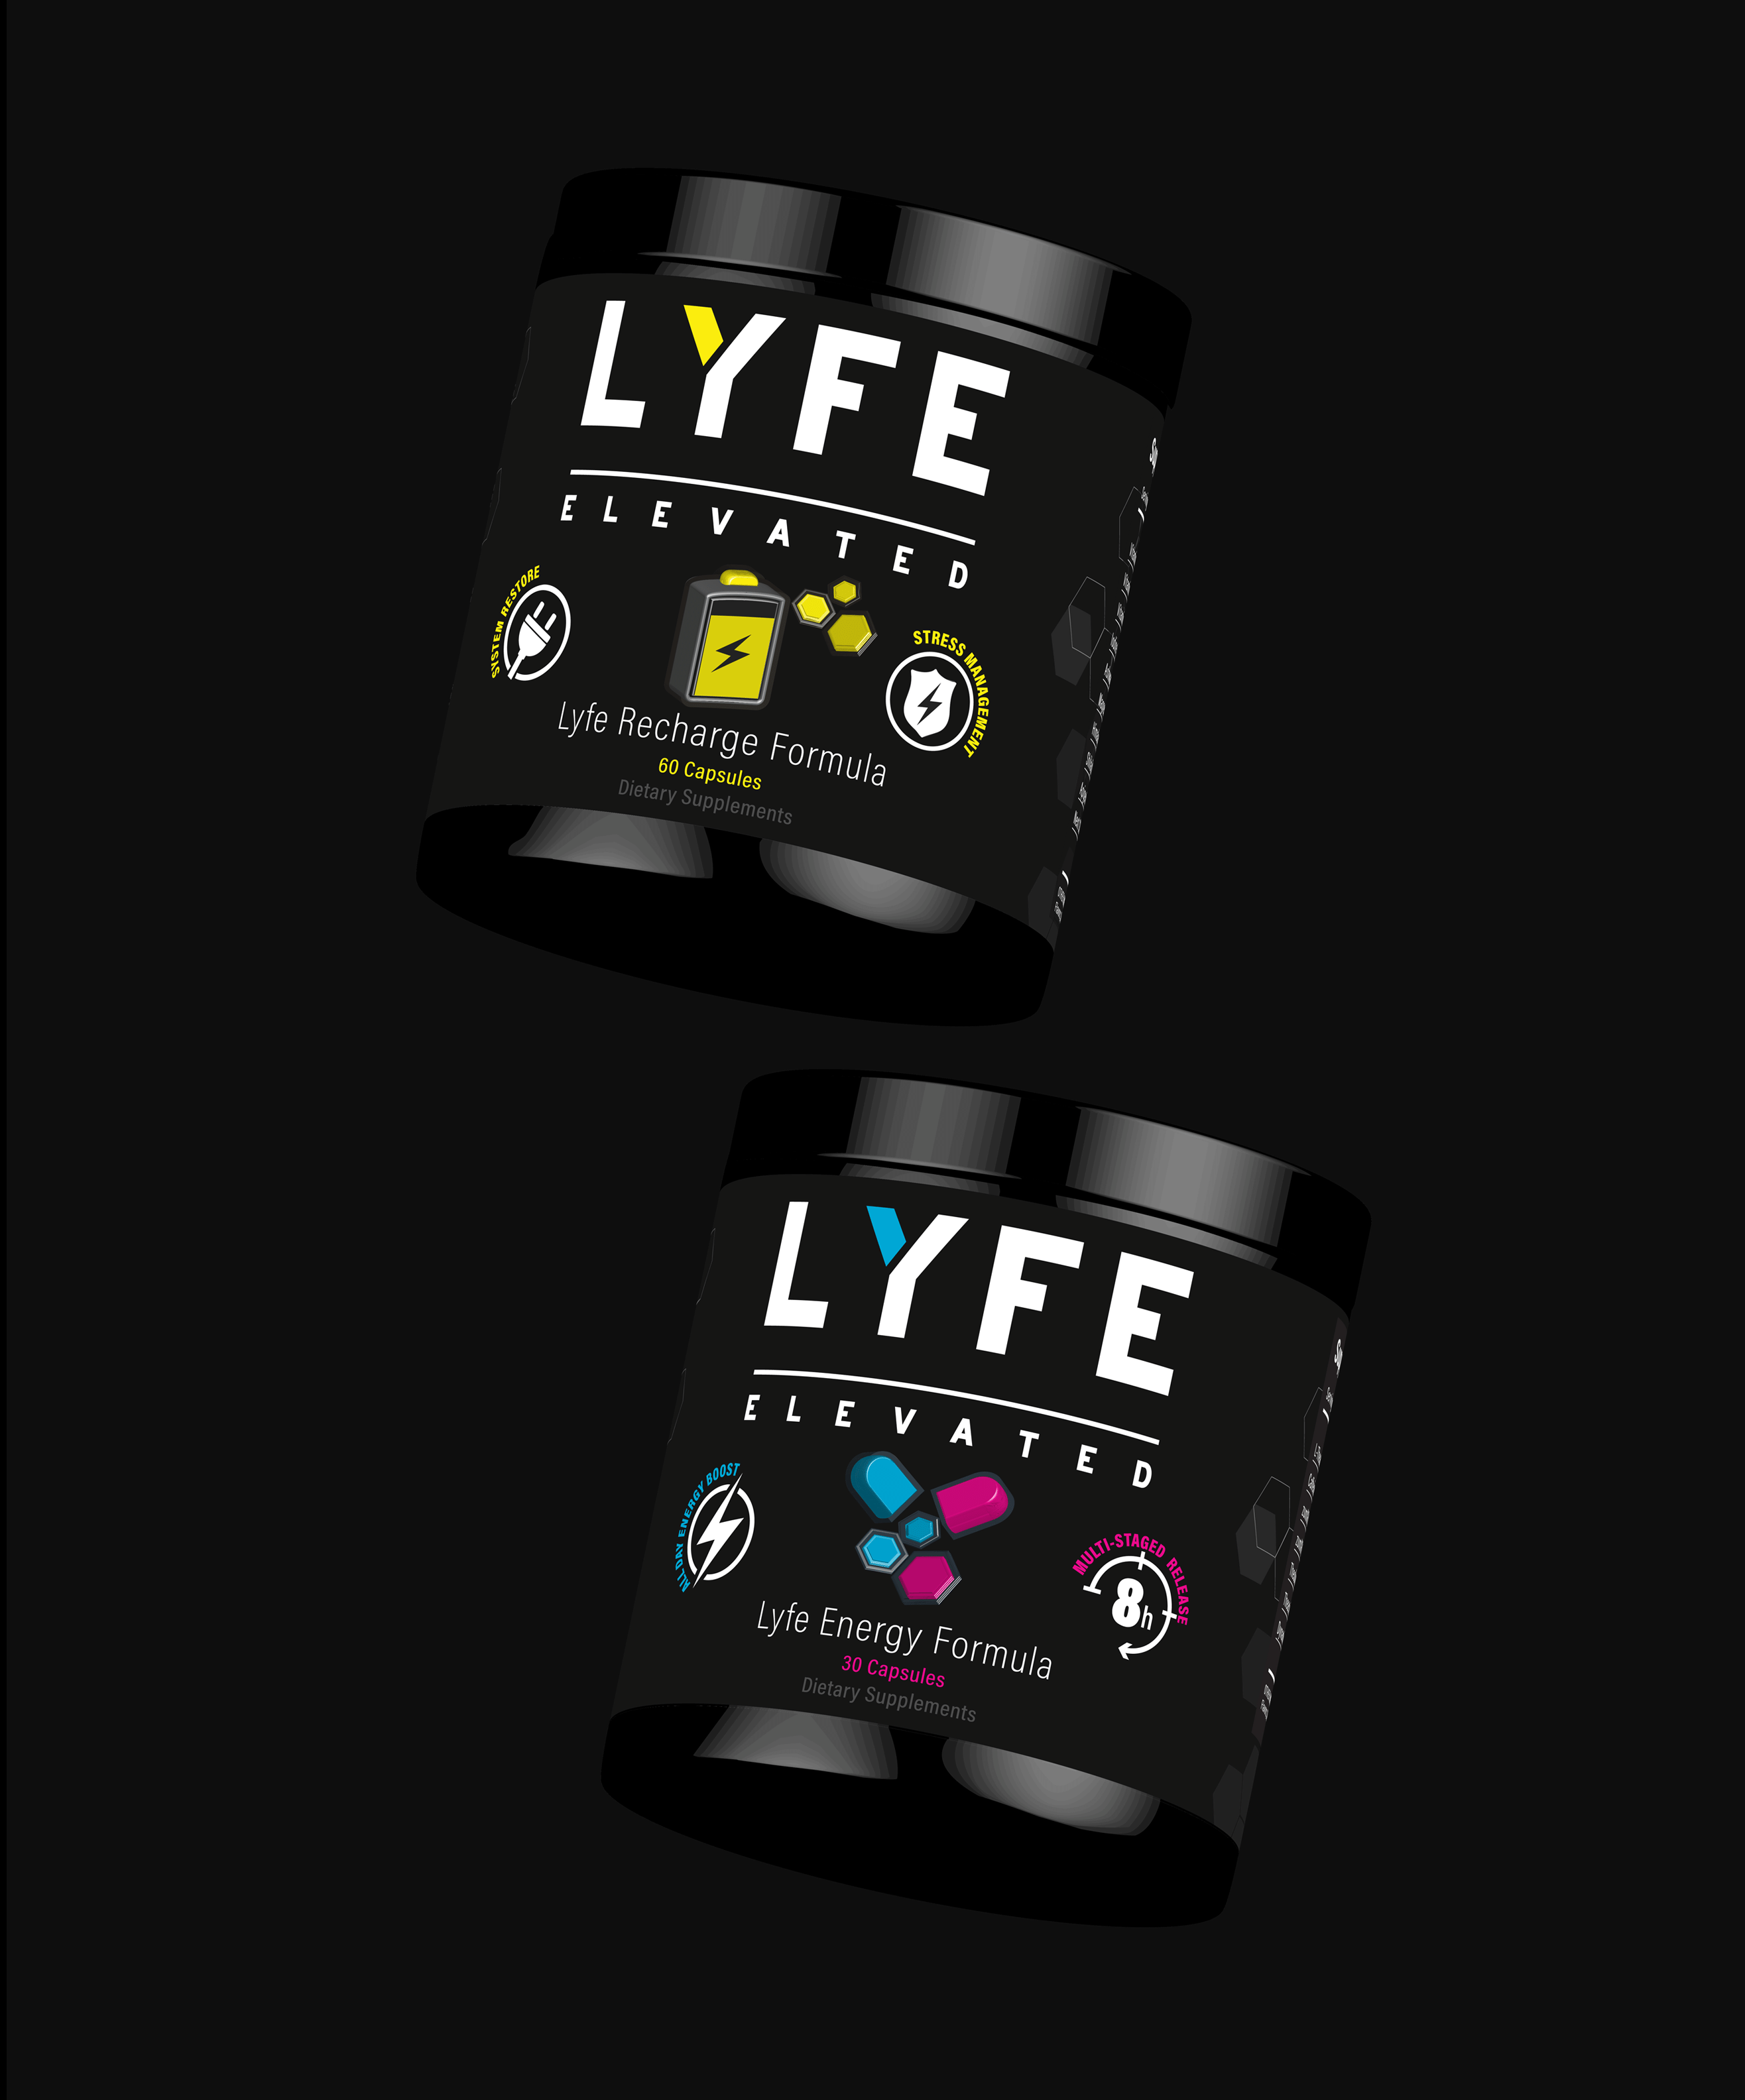 Dalya Kandil\'s Logo and Brand Design for Lyfe Elevated, Formulated and Marketing by Michael Ulisse